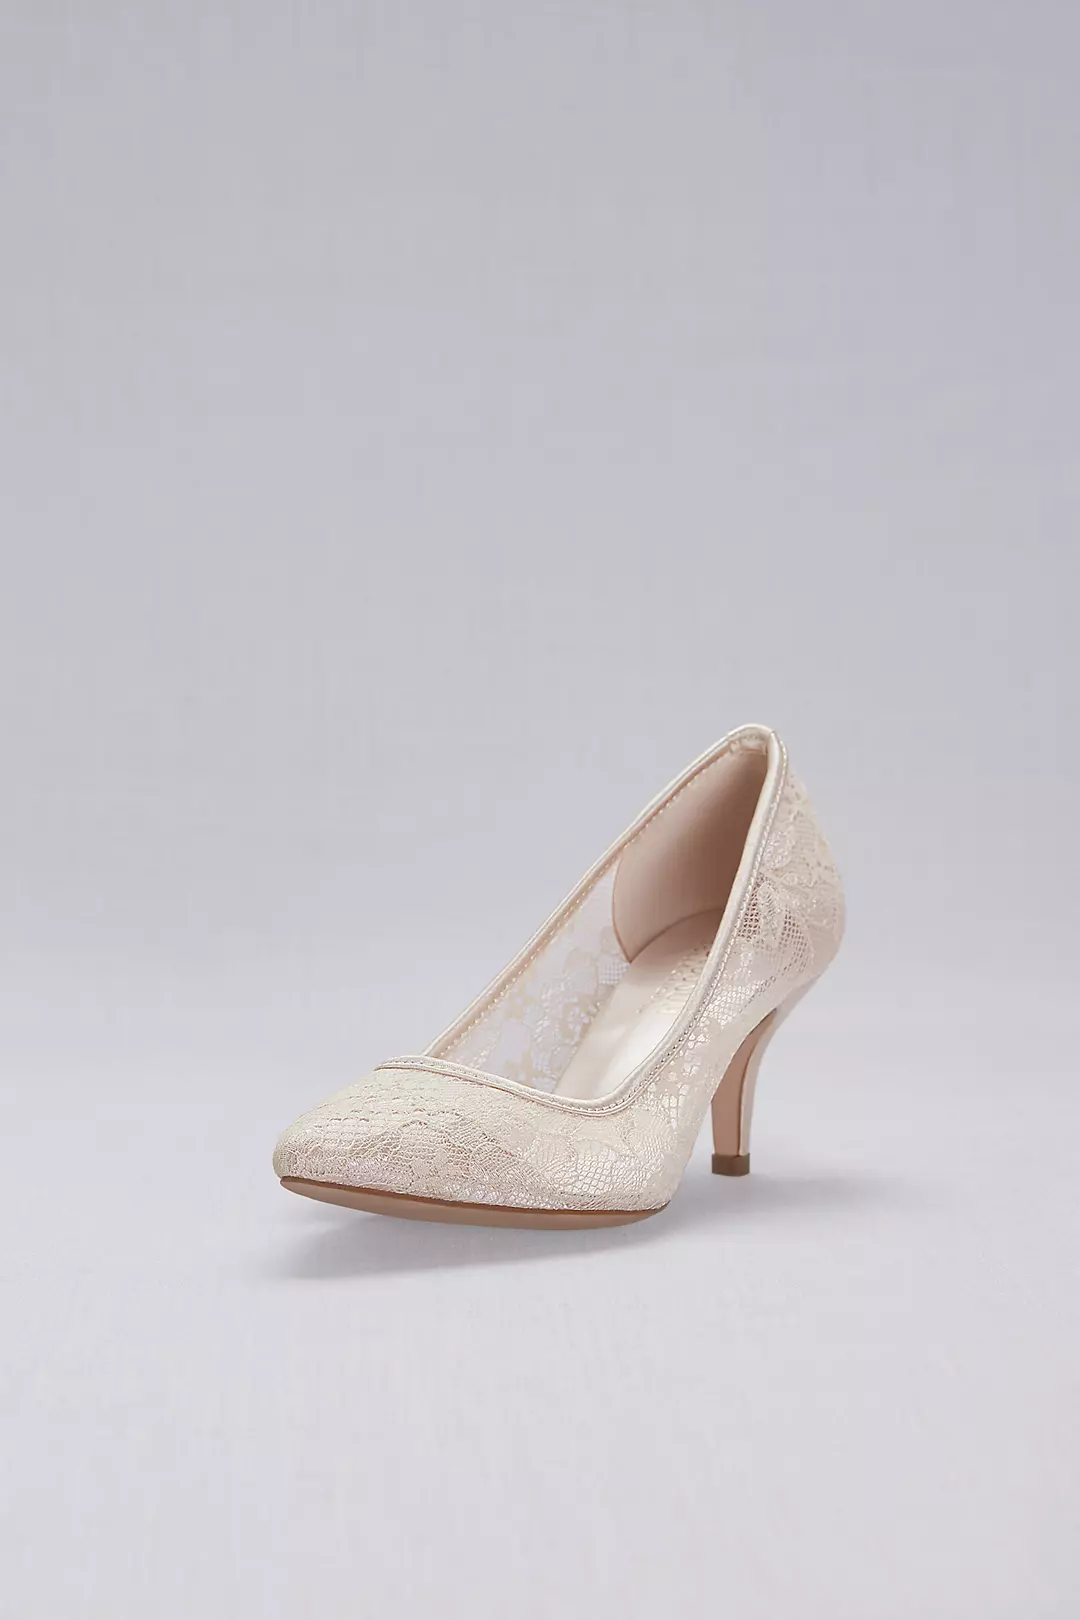 Lace Pointed-Toe Mid-Heel Pumps Image